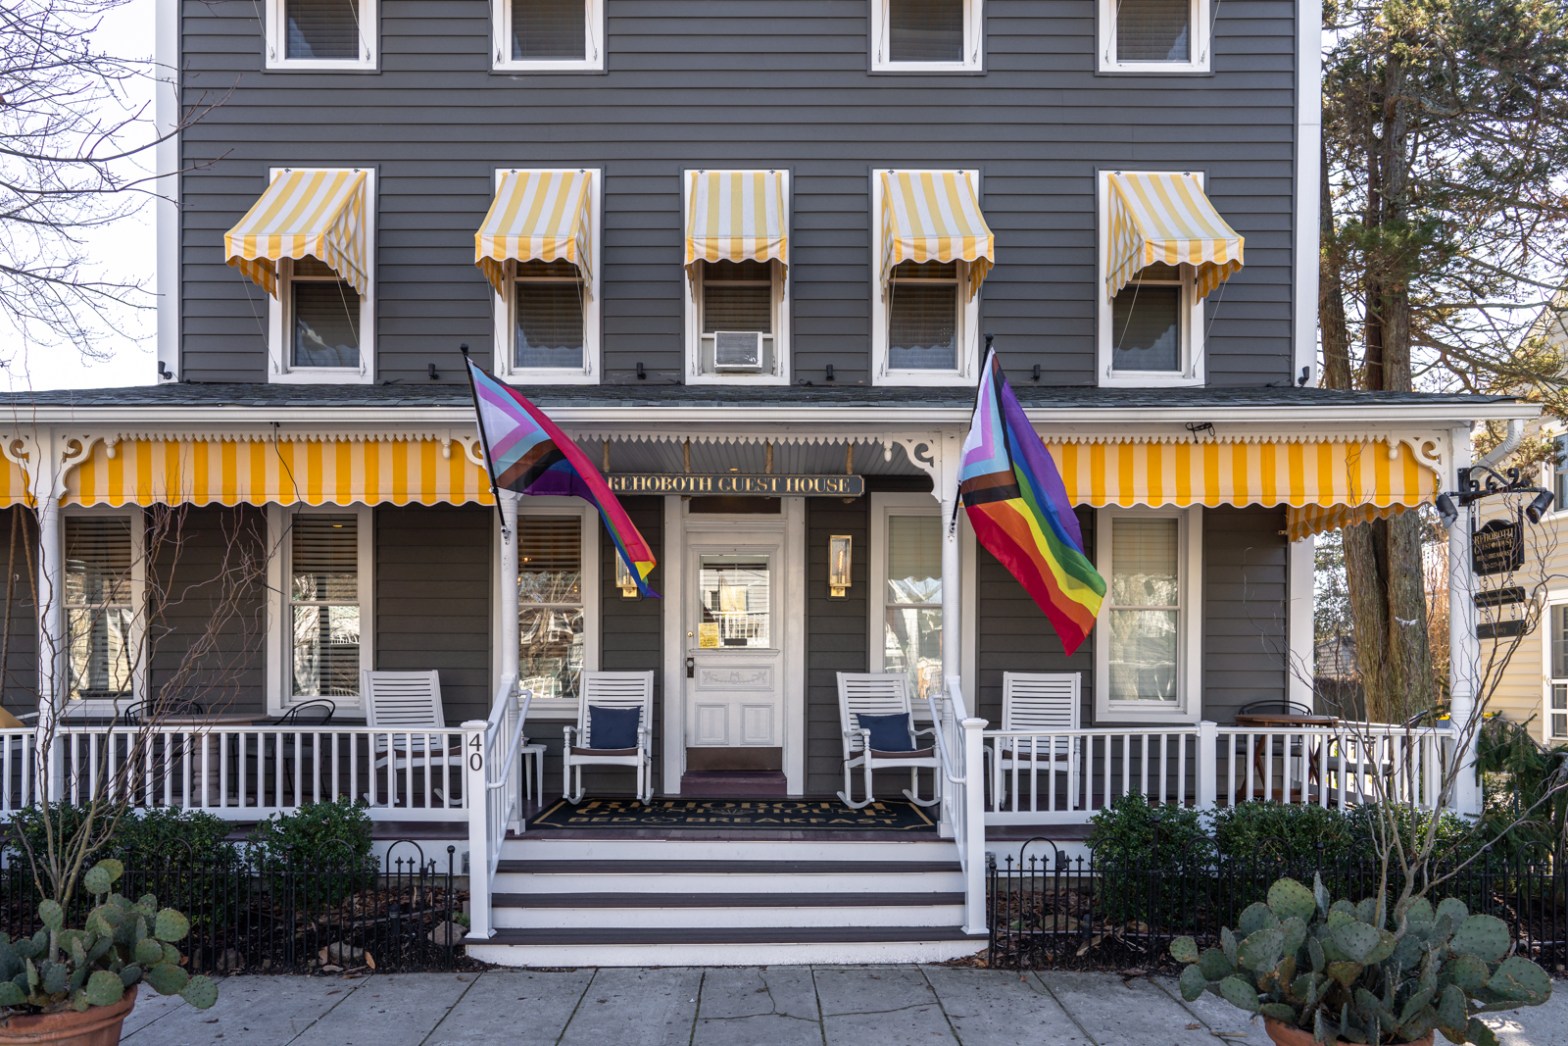 a photo of the outside of Rehoboth Guest House. The building is three stories with white windows and yellow and white striped awnings above them. There are two gay flags waving at the entrance.